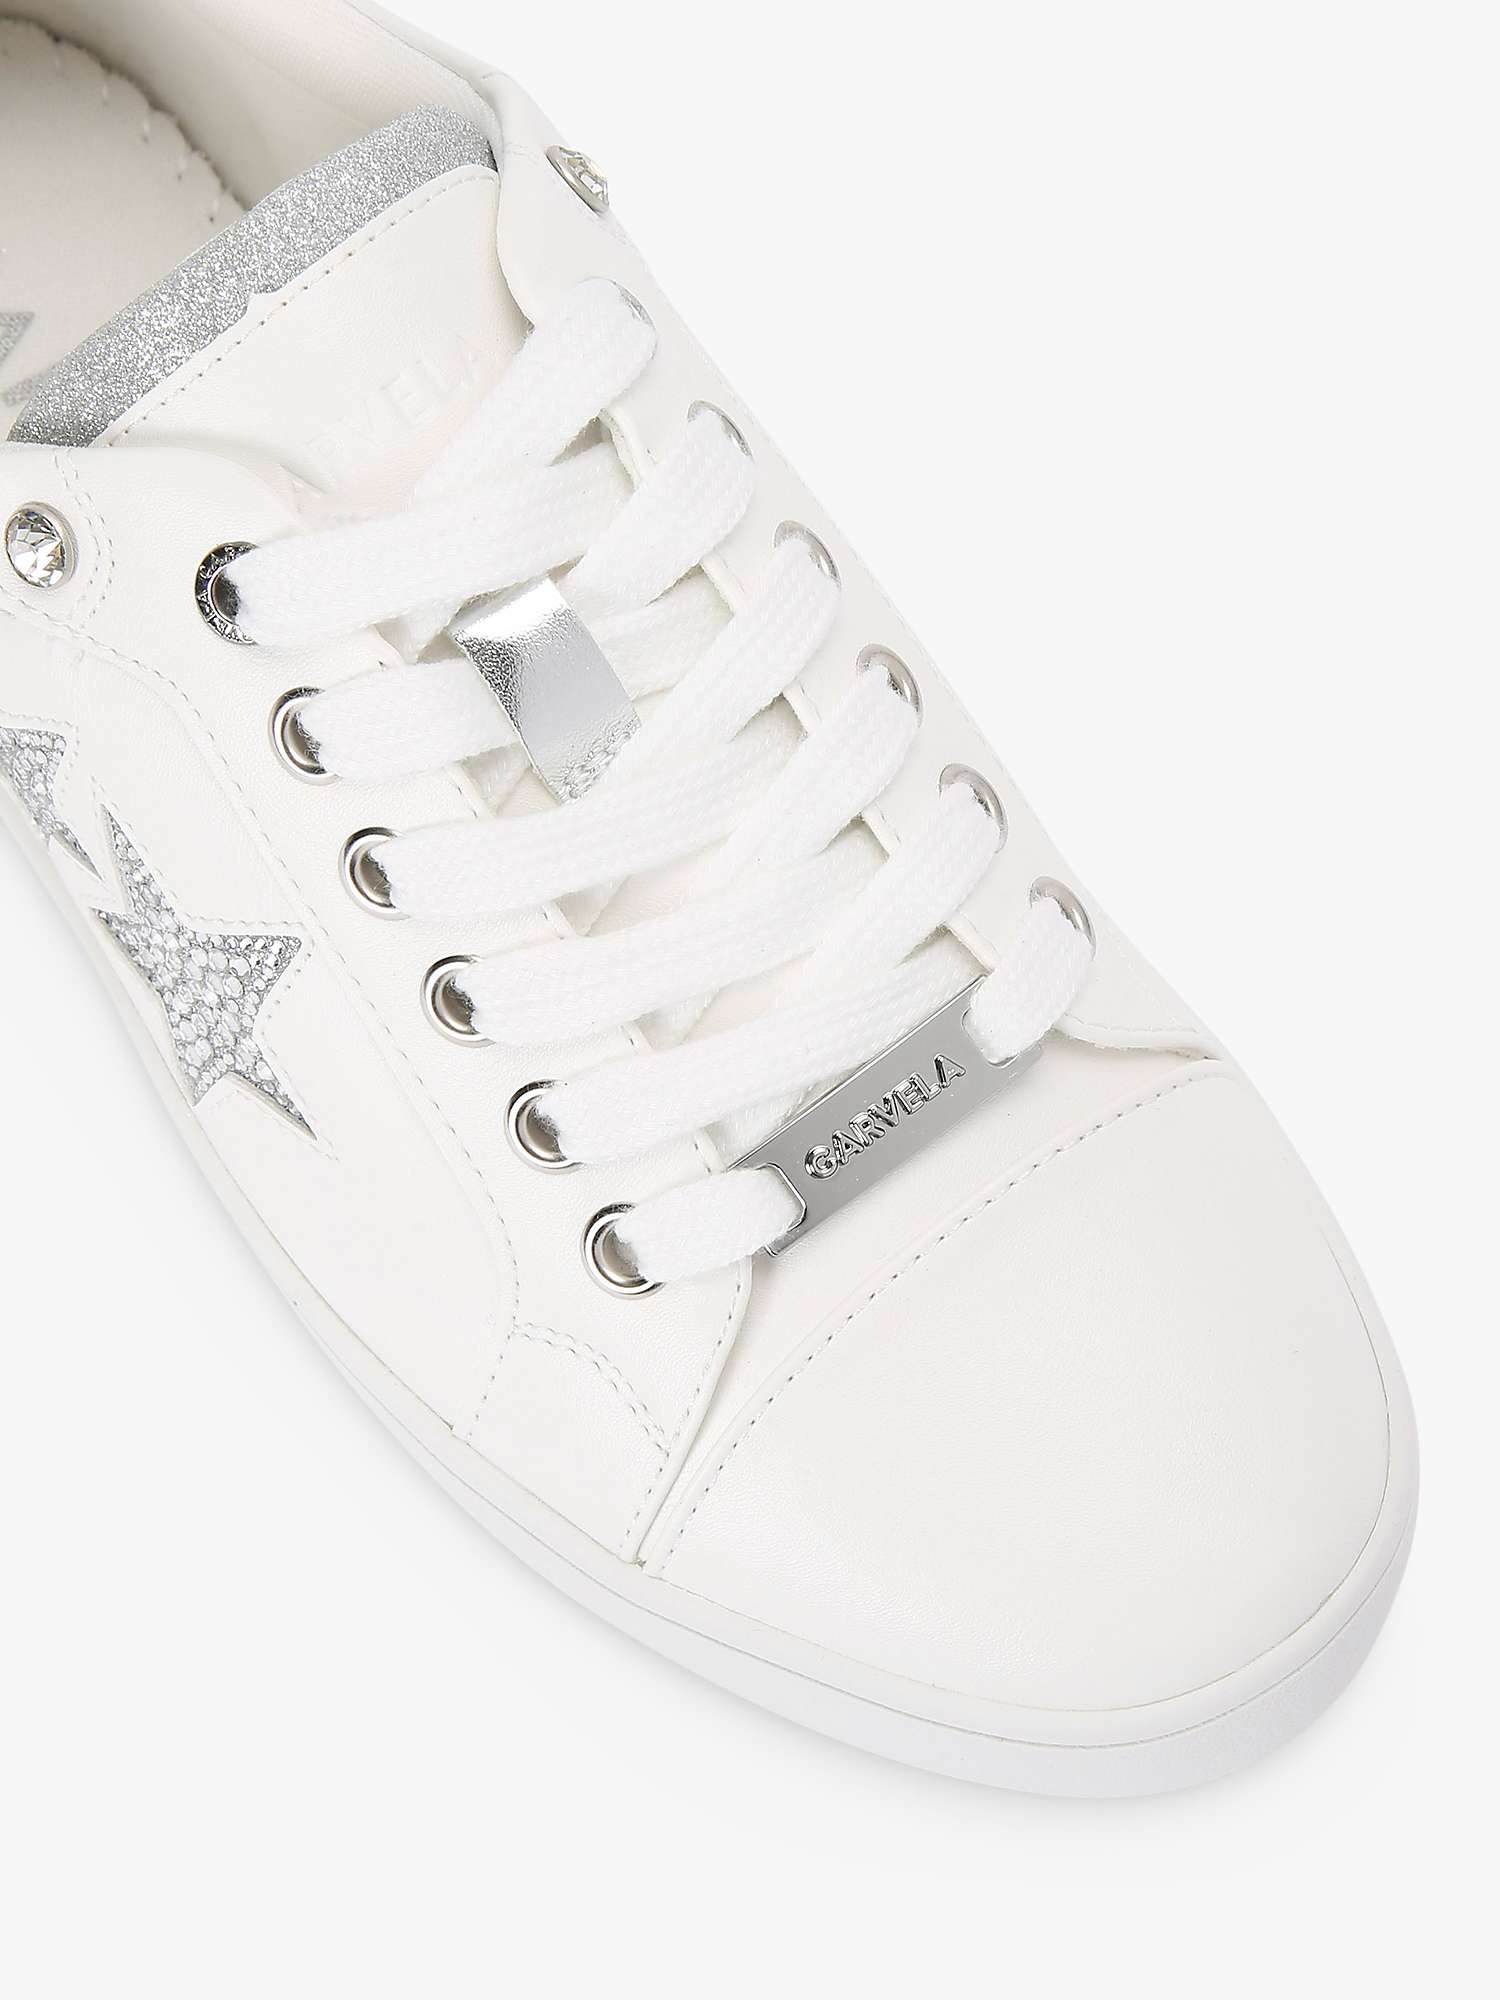 Buy Carvela Galaxy Star Embellished Trainers, White Online at johnlewis.com